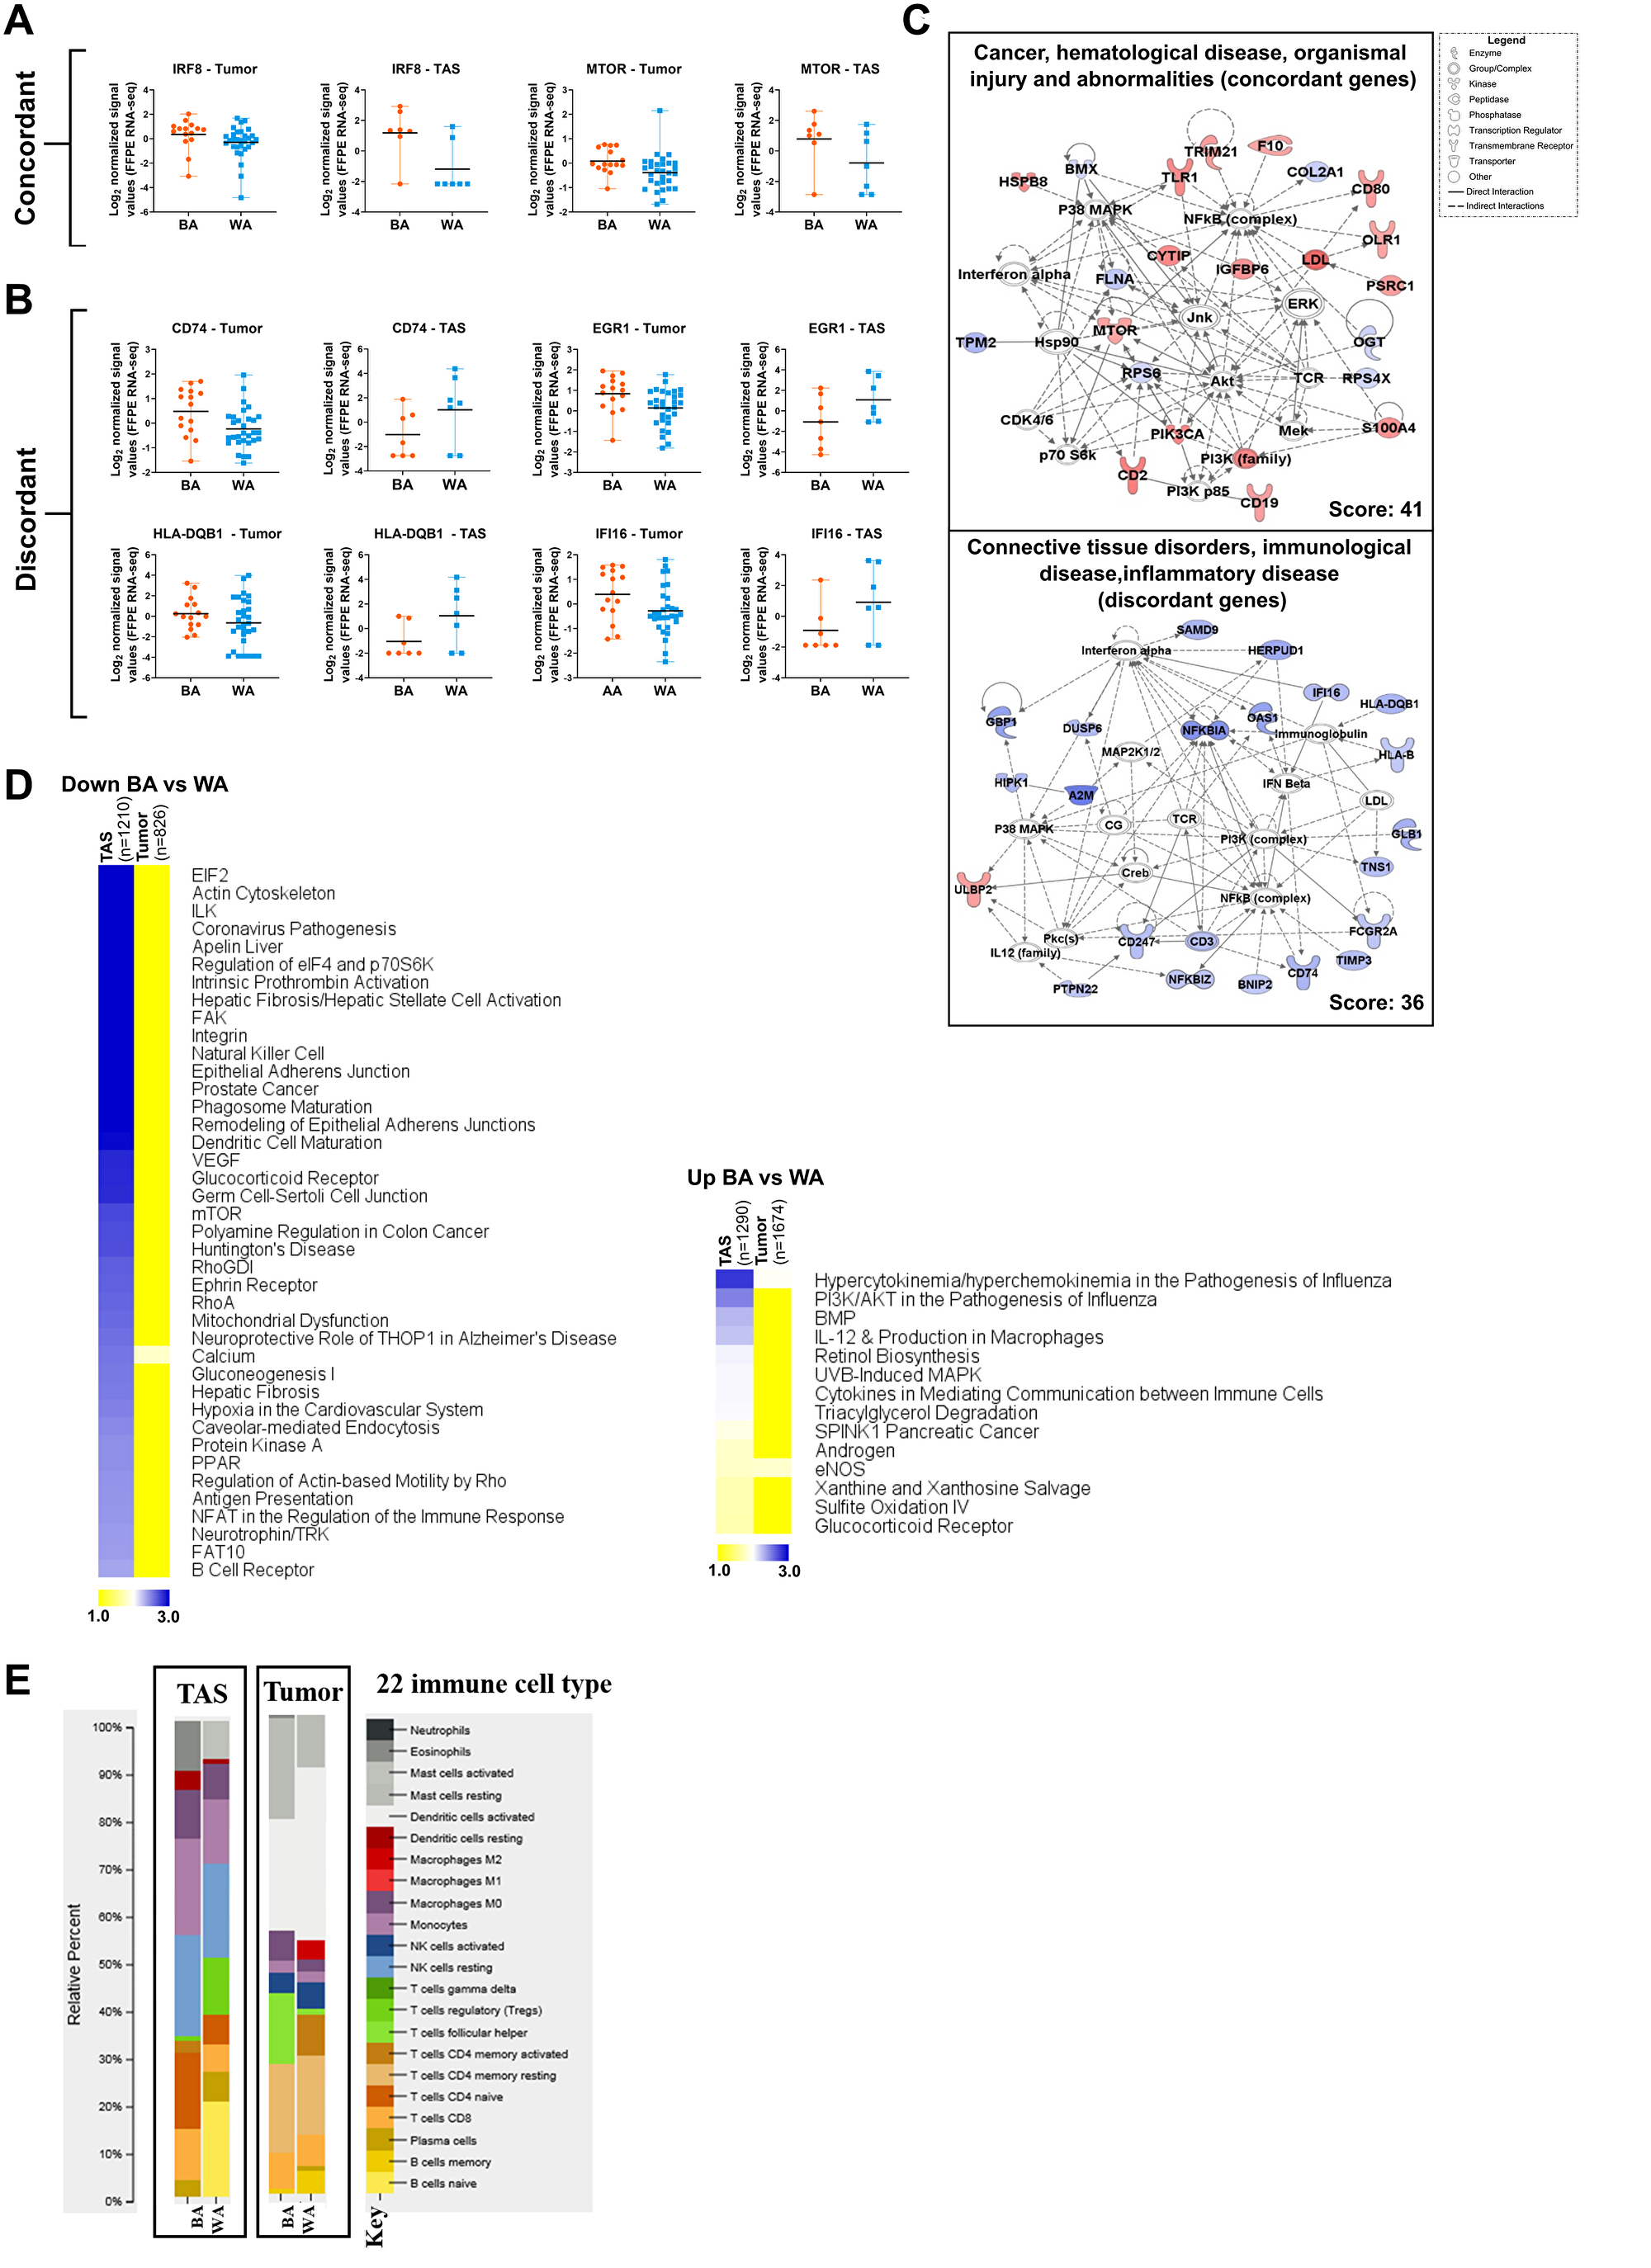 Figure 3: Comparative pathway analysis of significantly differentially expressed genes in BA versus WA PCa patients in tumor and tumor-adjacent stroma (TAS).